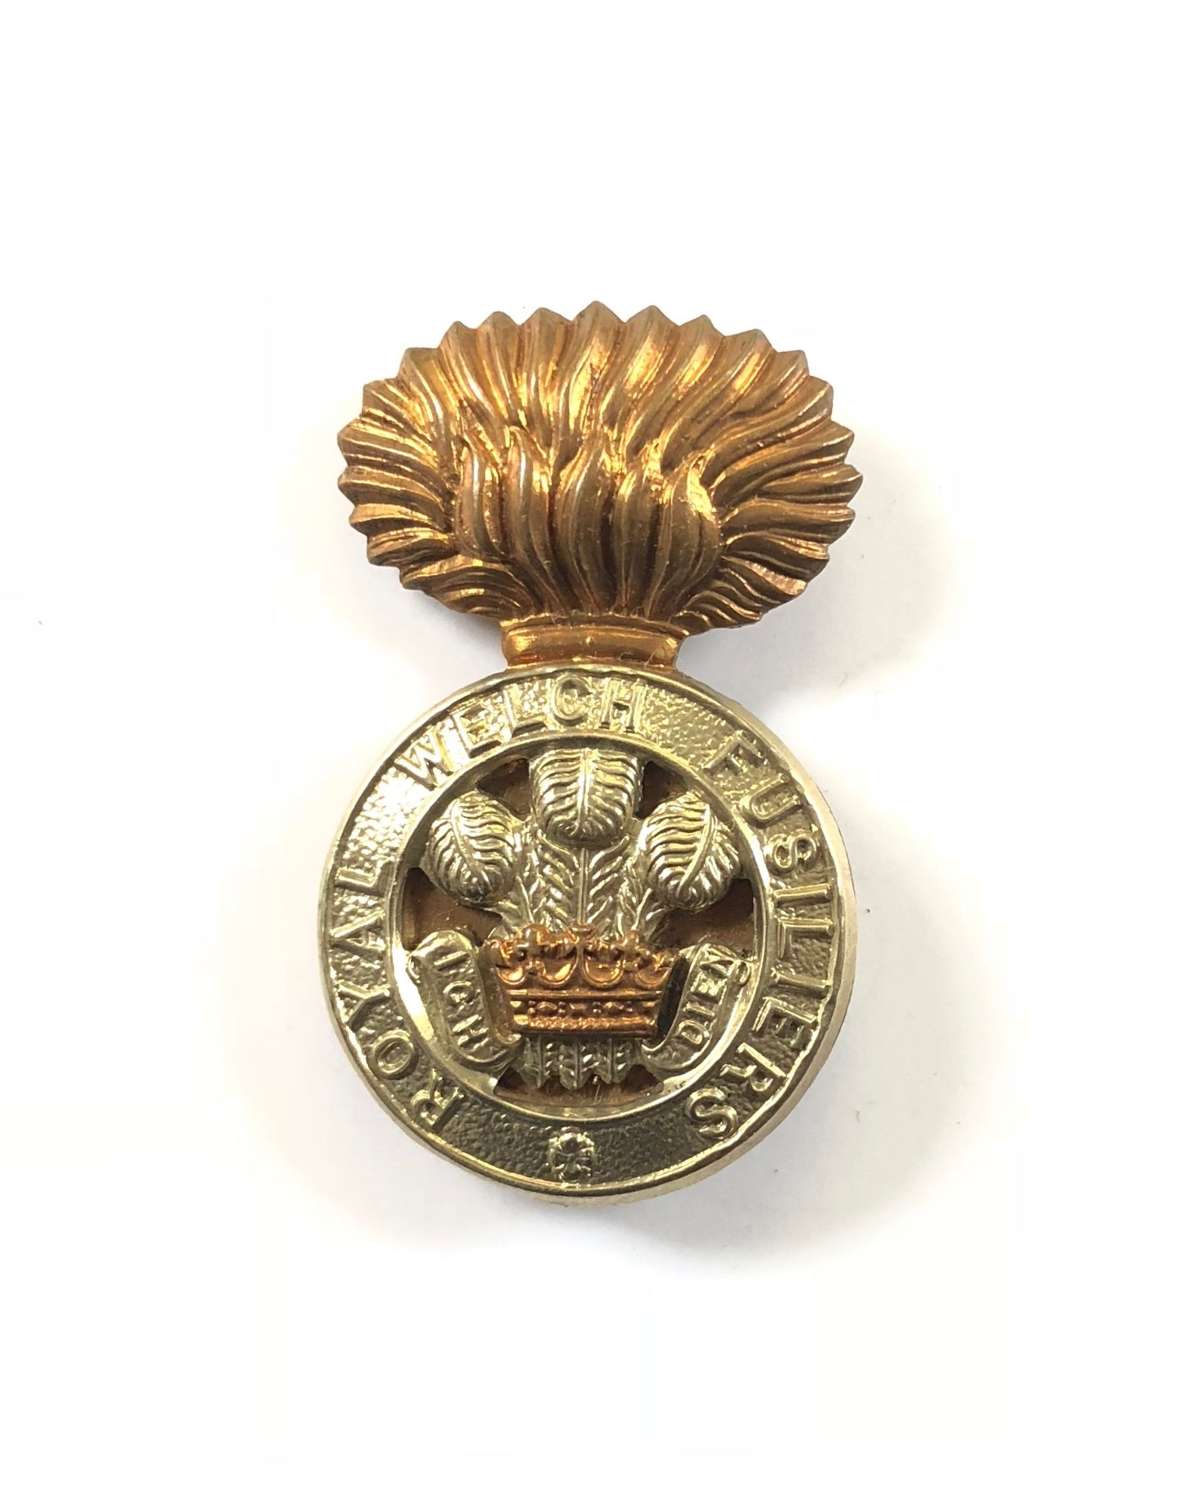 WW2 Pattern Royal Welch Fusiliers Cap Badge.